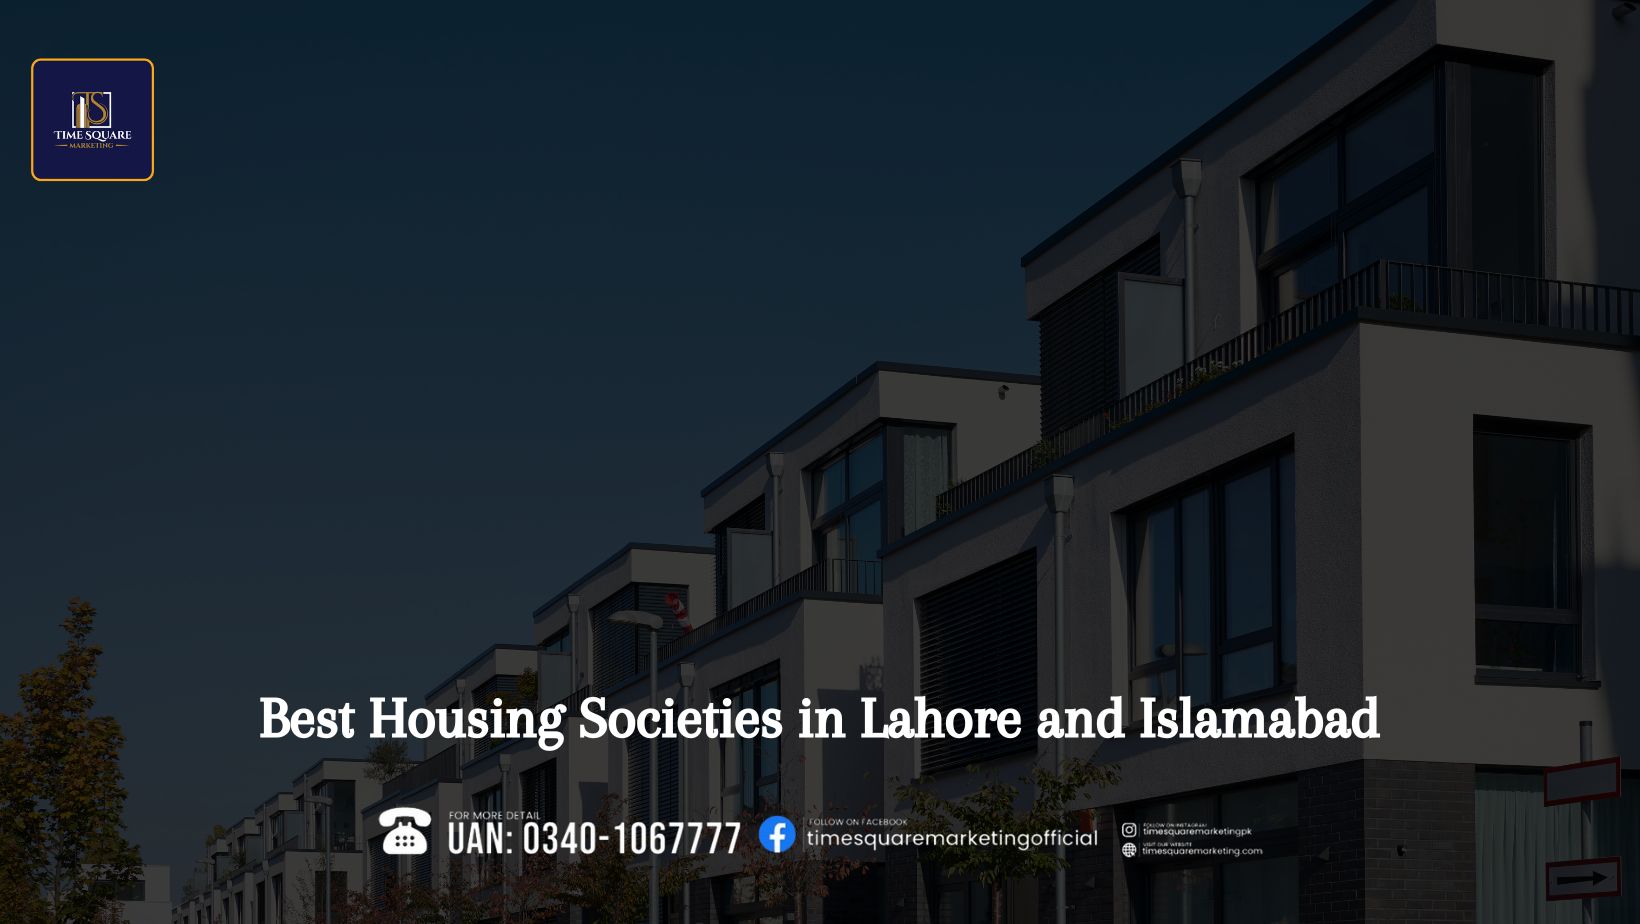 Best Housing Societies in Lahore and Islamabad